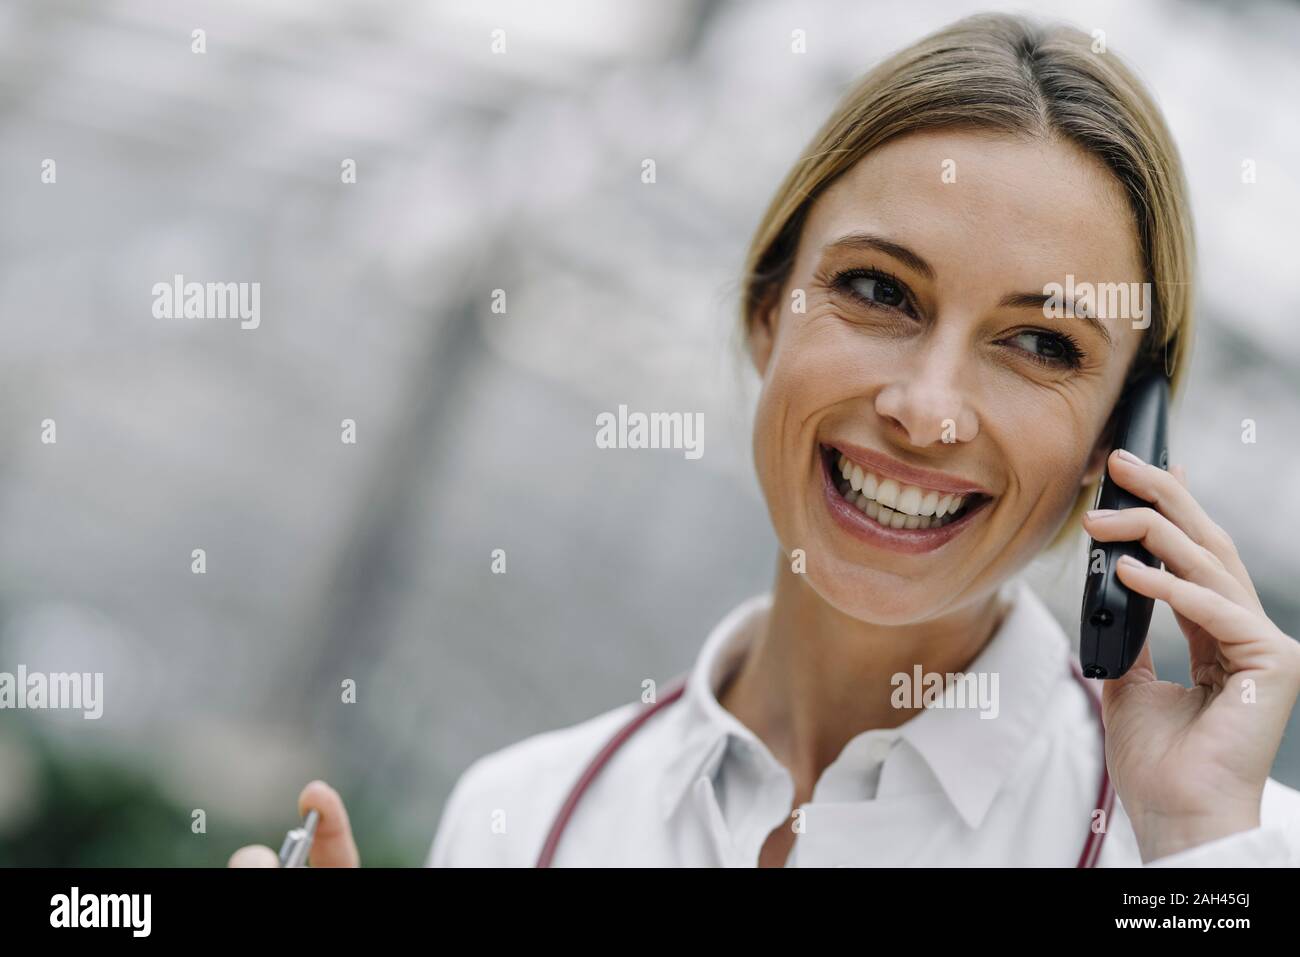 Portrait of a happy woman on the phone Banque D'Images